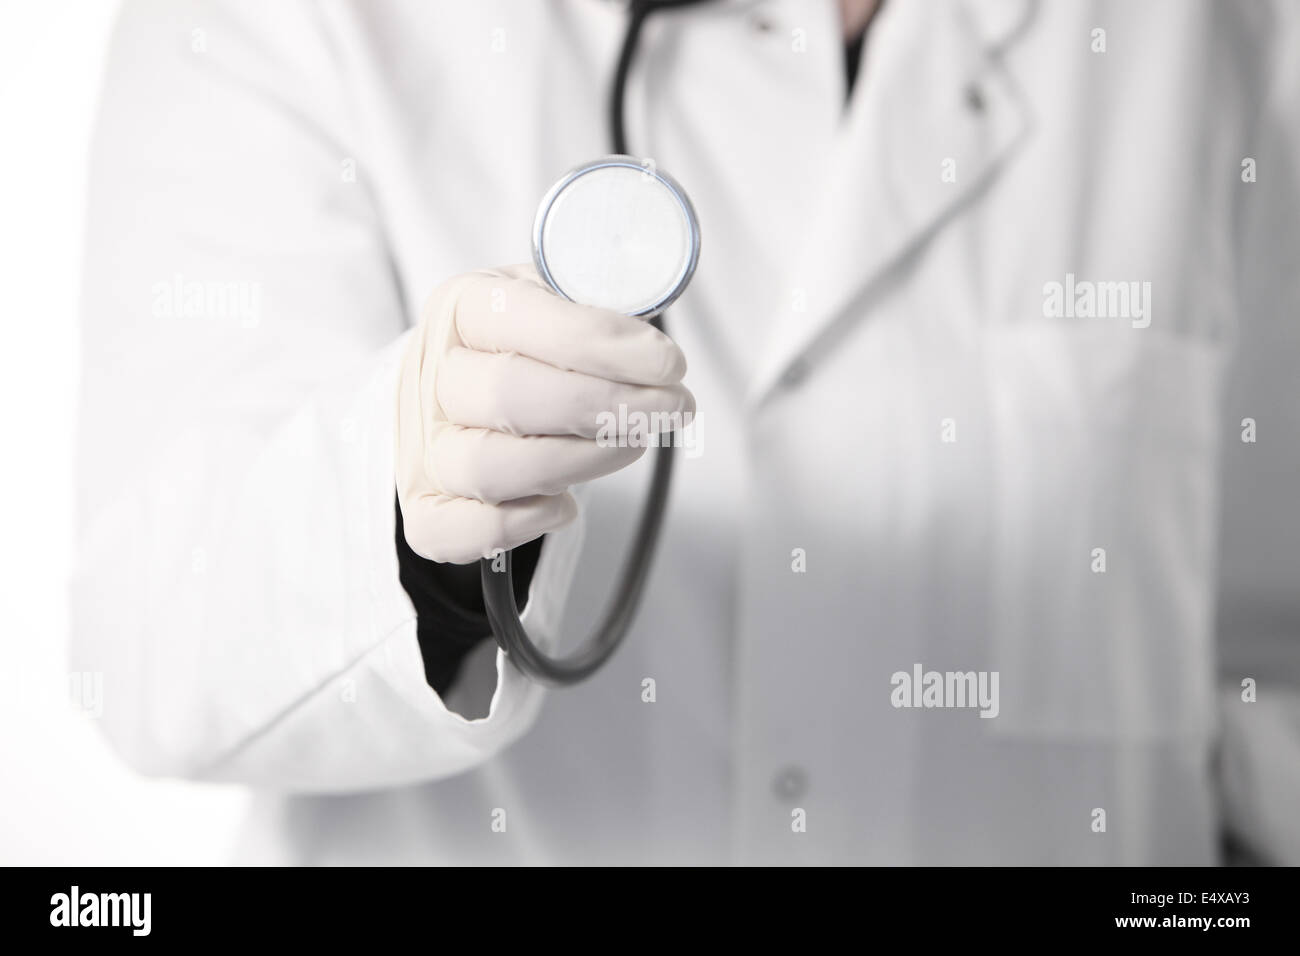 Doctor holding a stethoscope Stock Photo